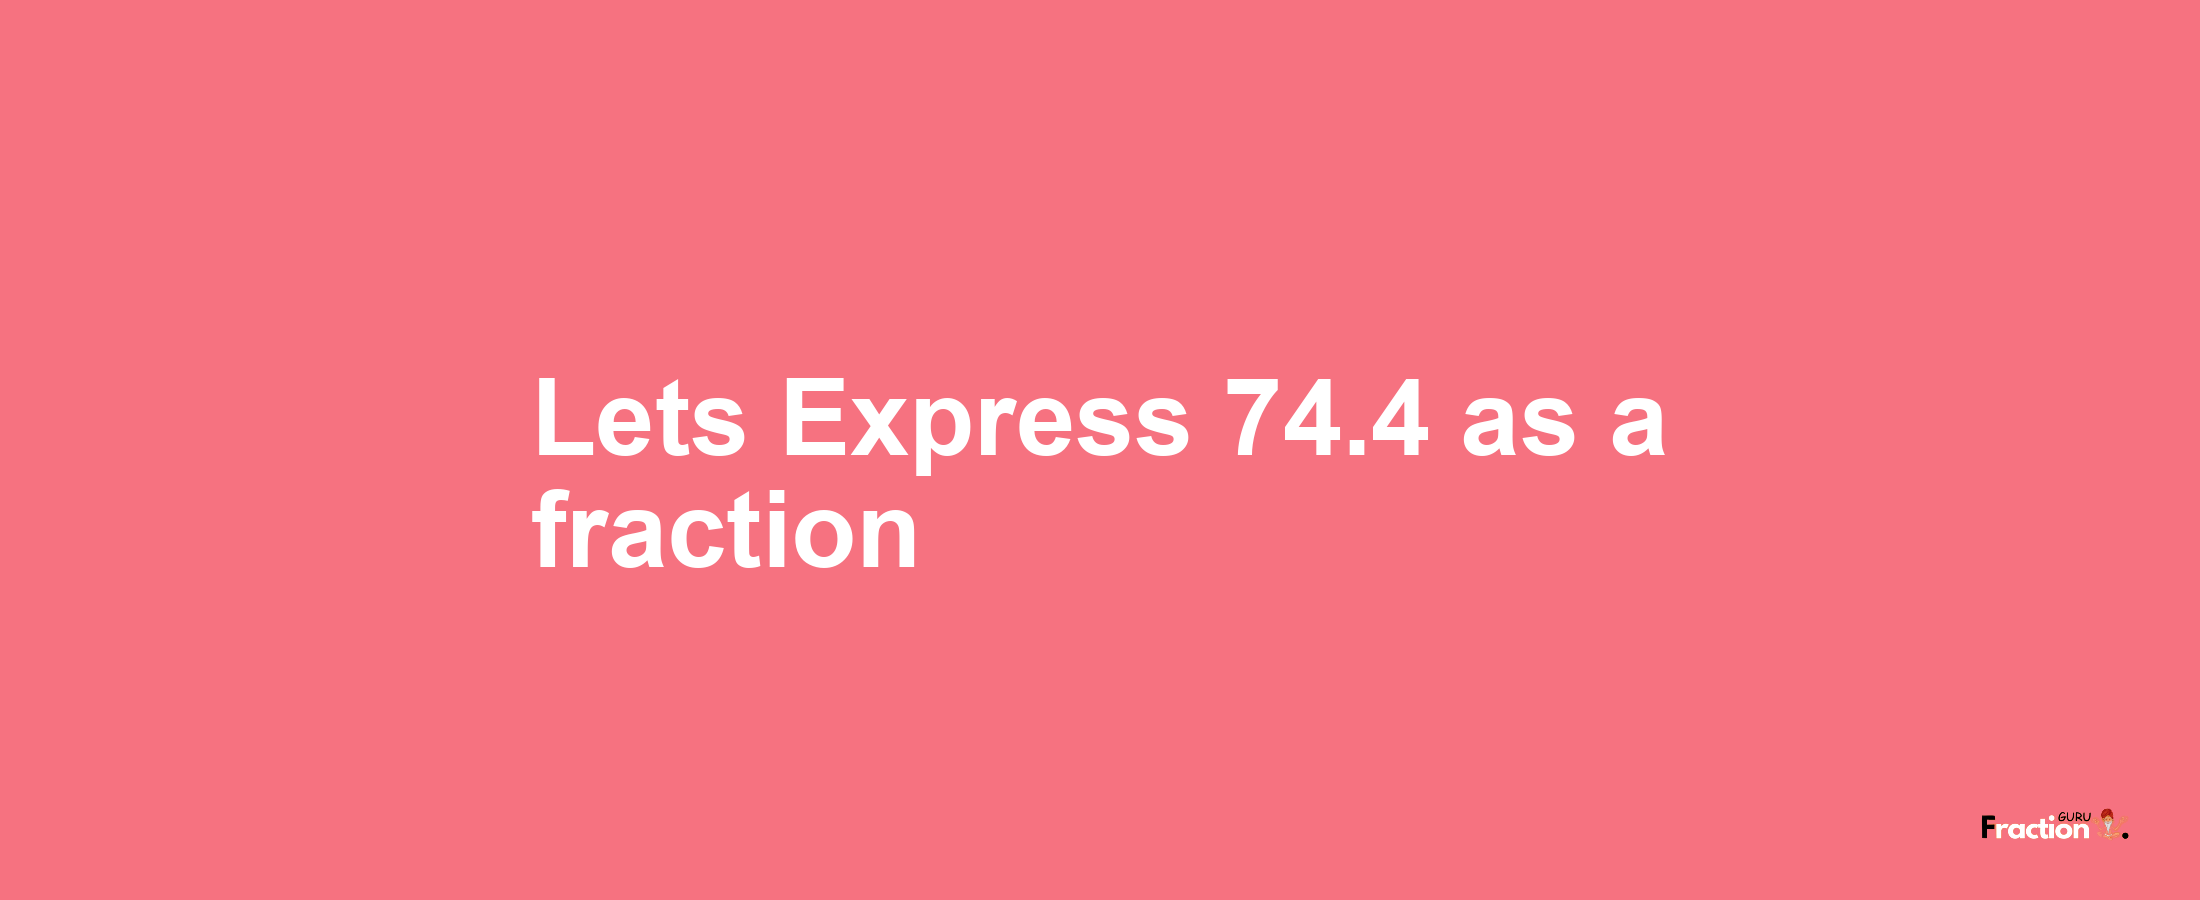 Lets Express 74.4 as afraction